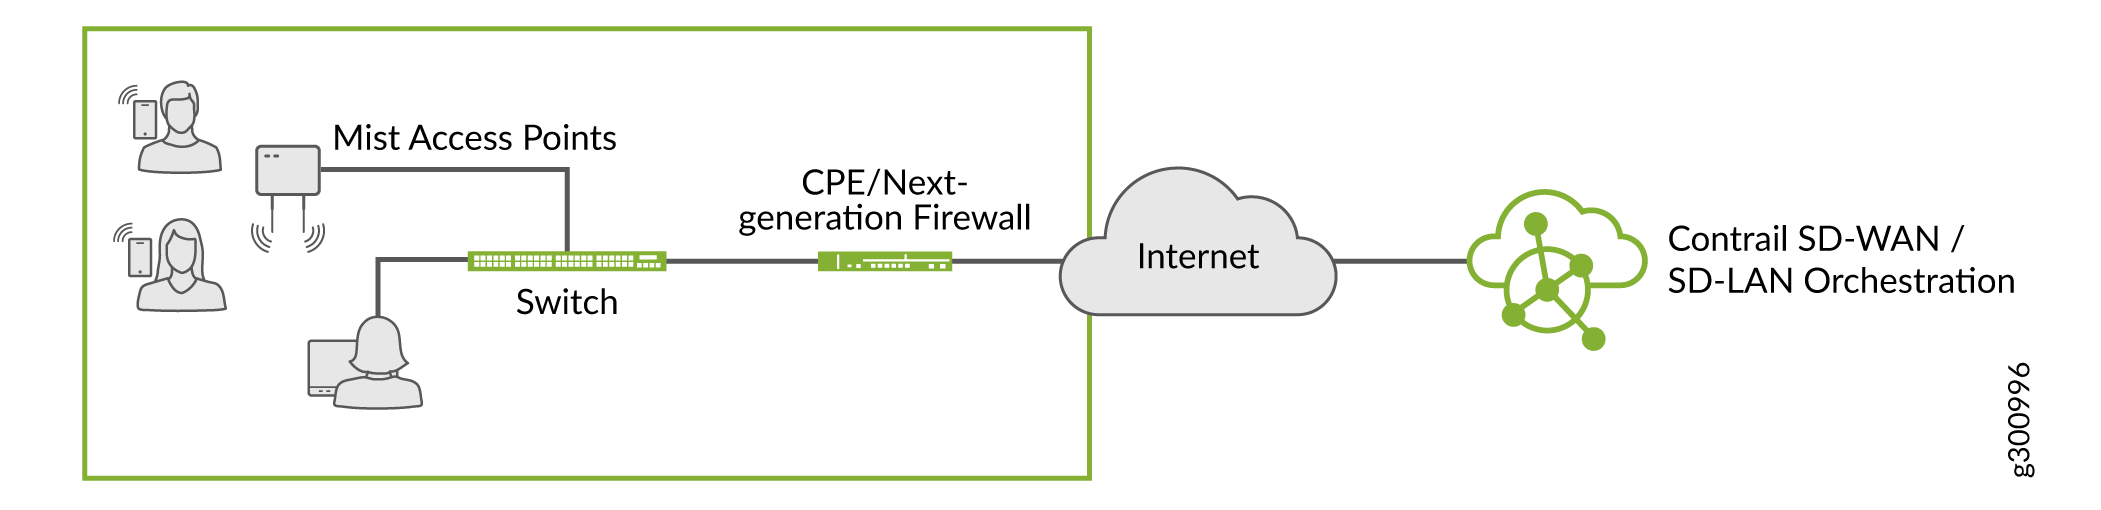 EX Behind a CPE or next-Generation
Firewall